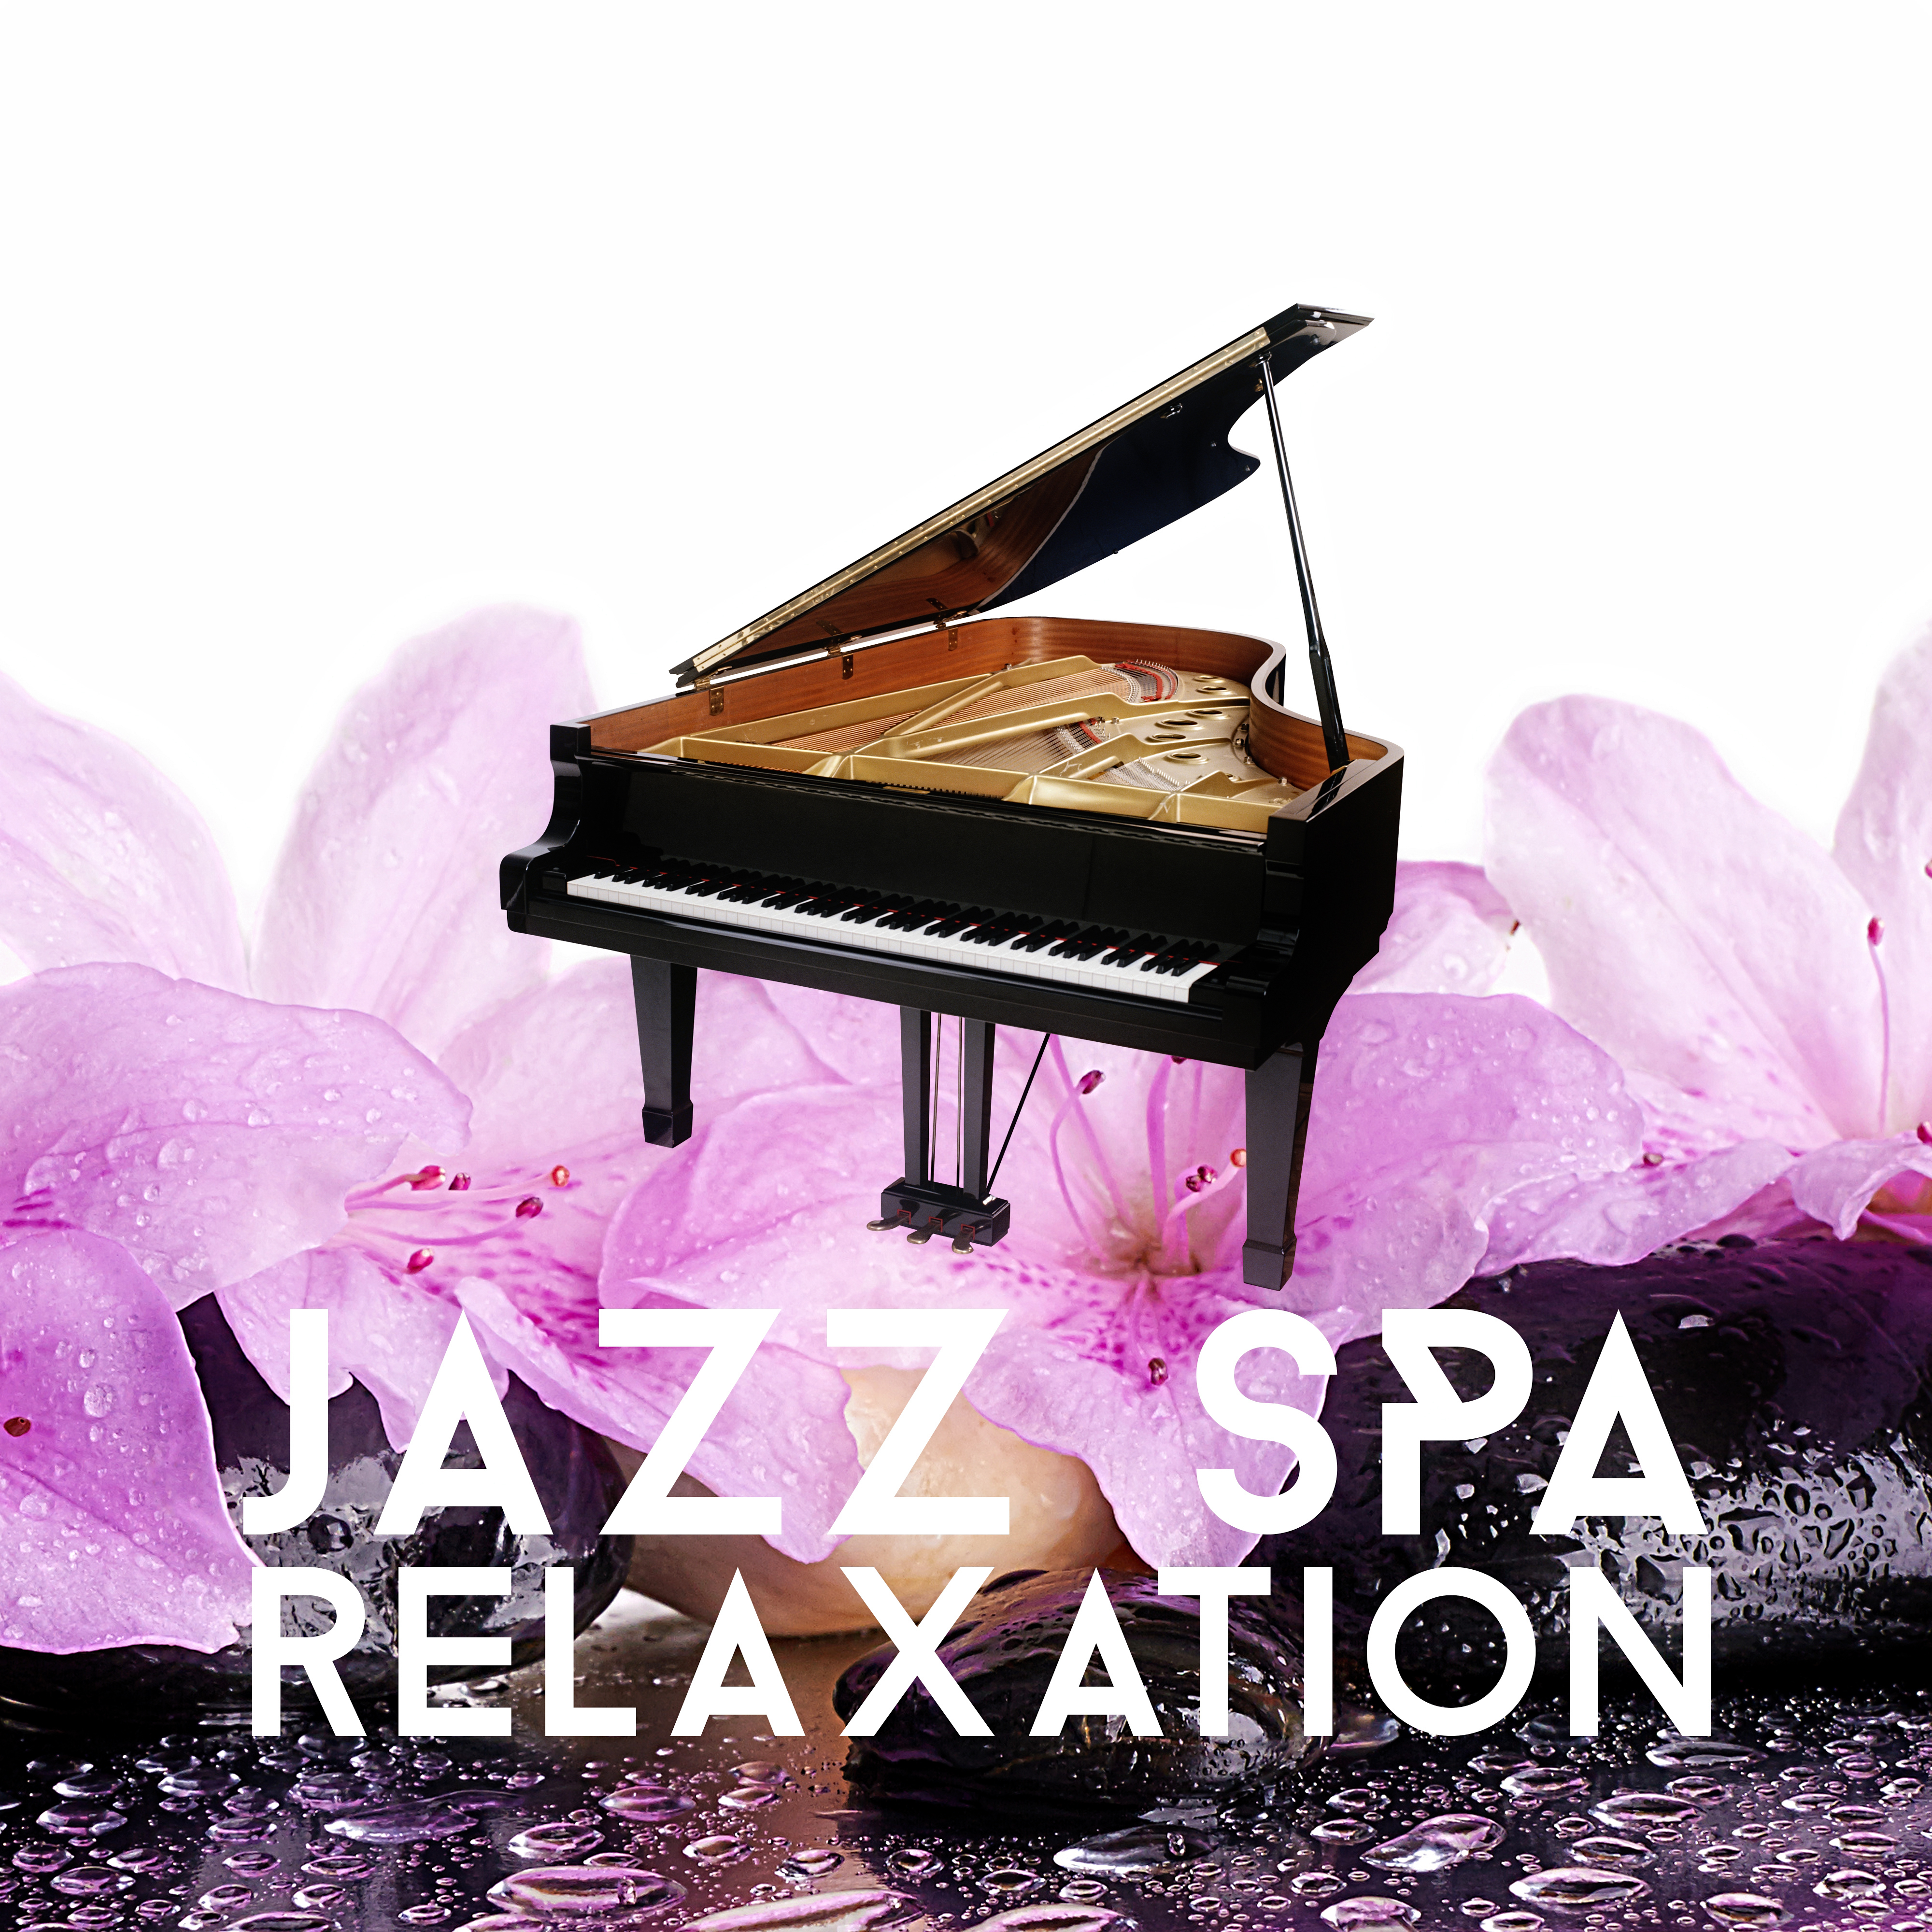 Jazz Spa Relaxation Music  Smooth Music, Relaxing Massage, Lounge Music, New Style, Spa  Wellness Music, Serenity Spa, Restful